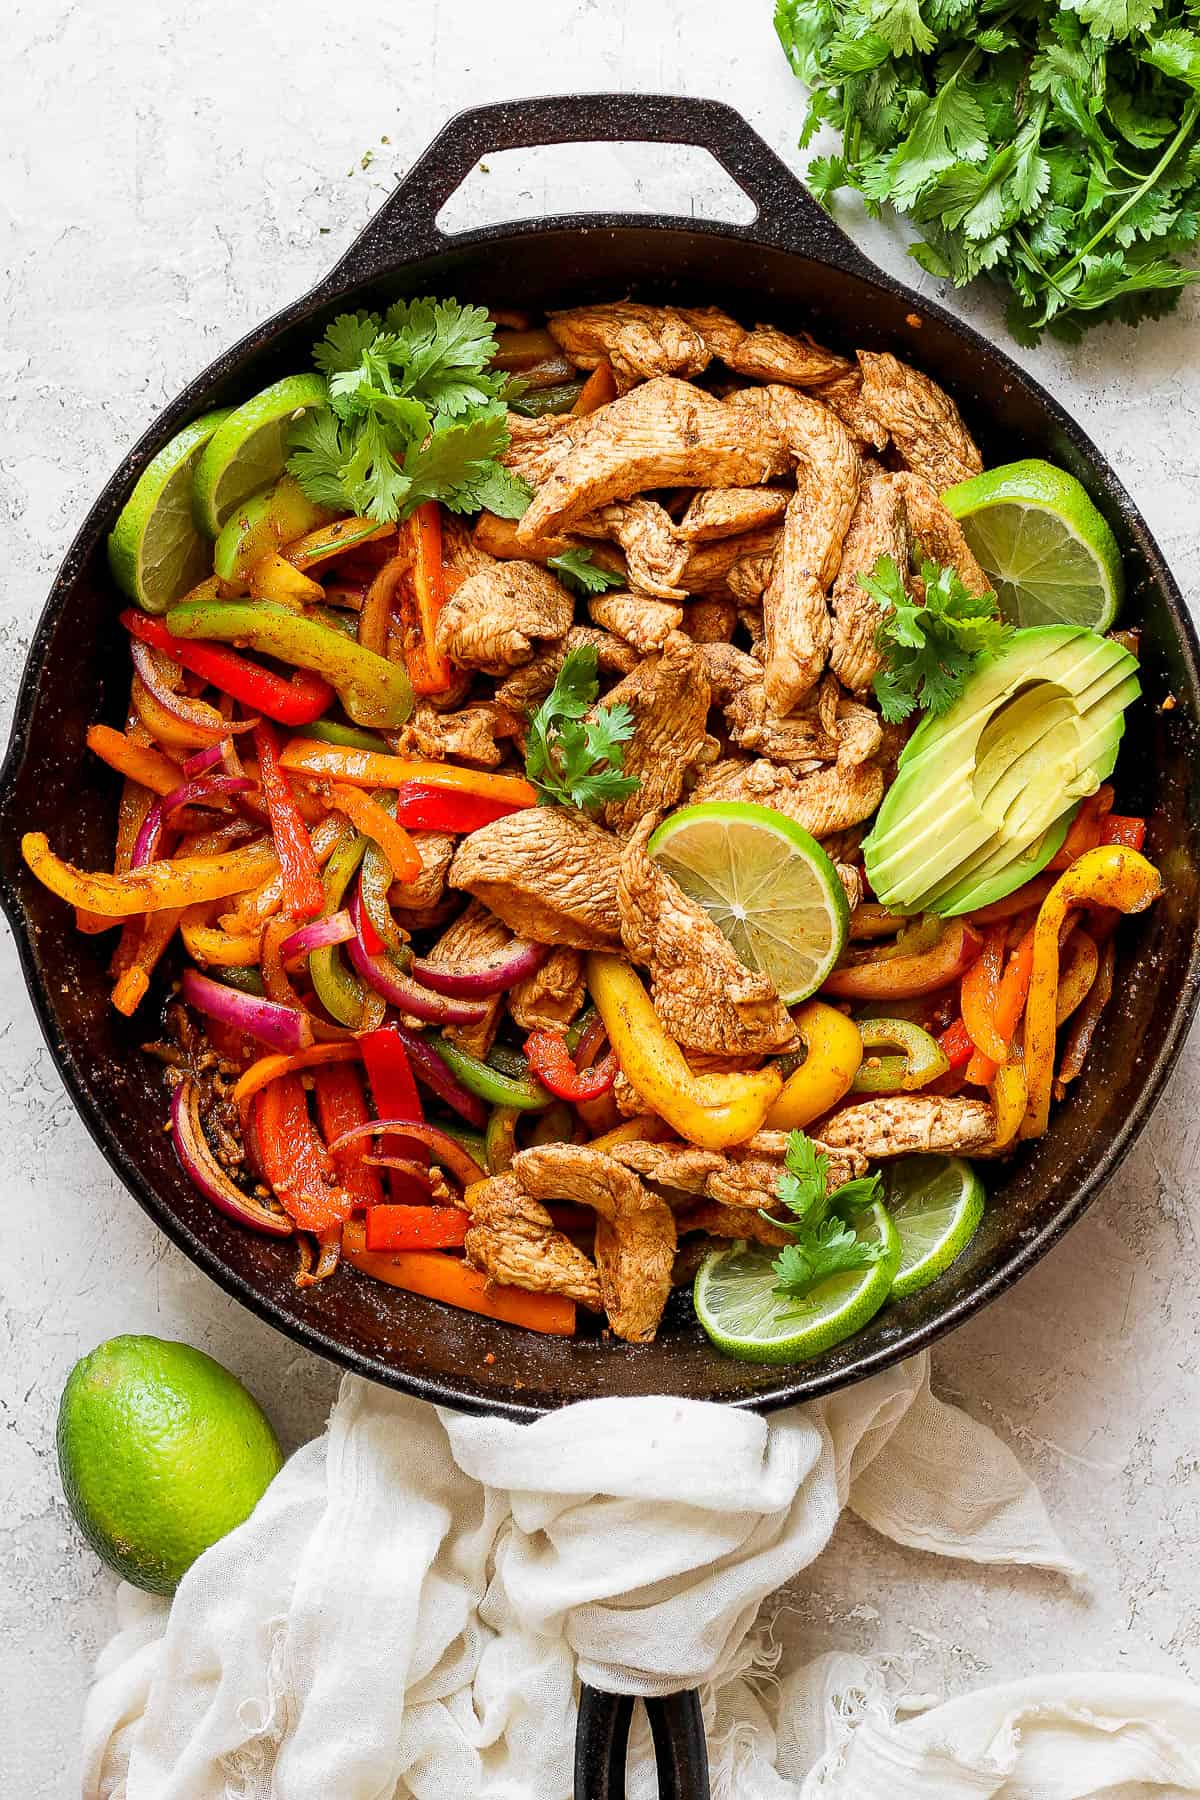 Cooked fajita chicken and veggies in a cast iron skillet.